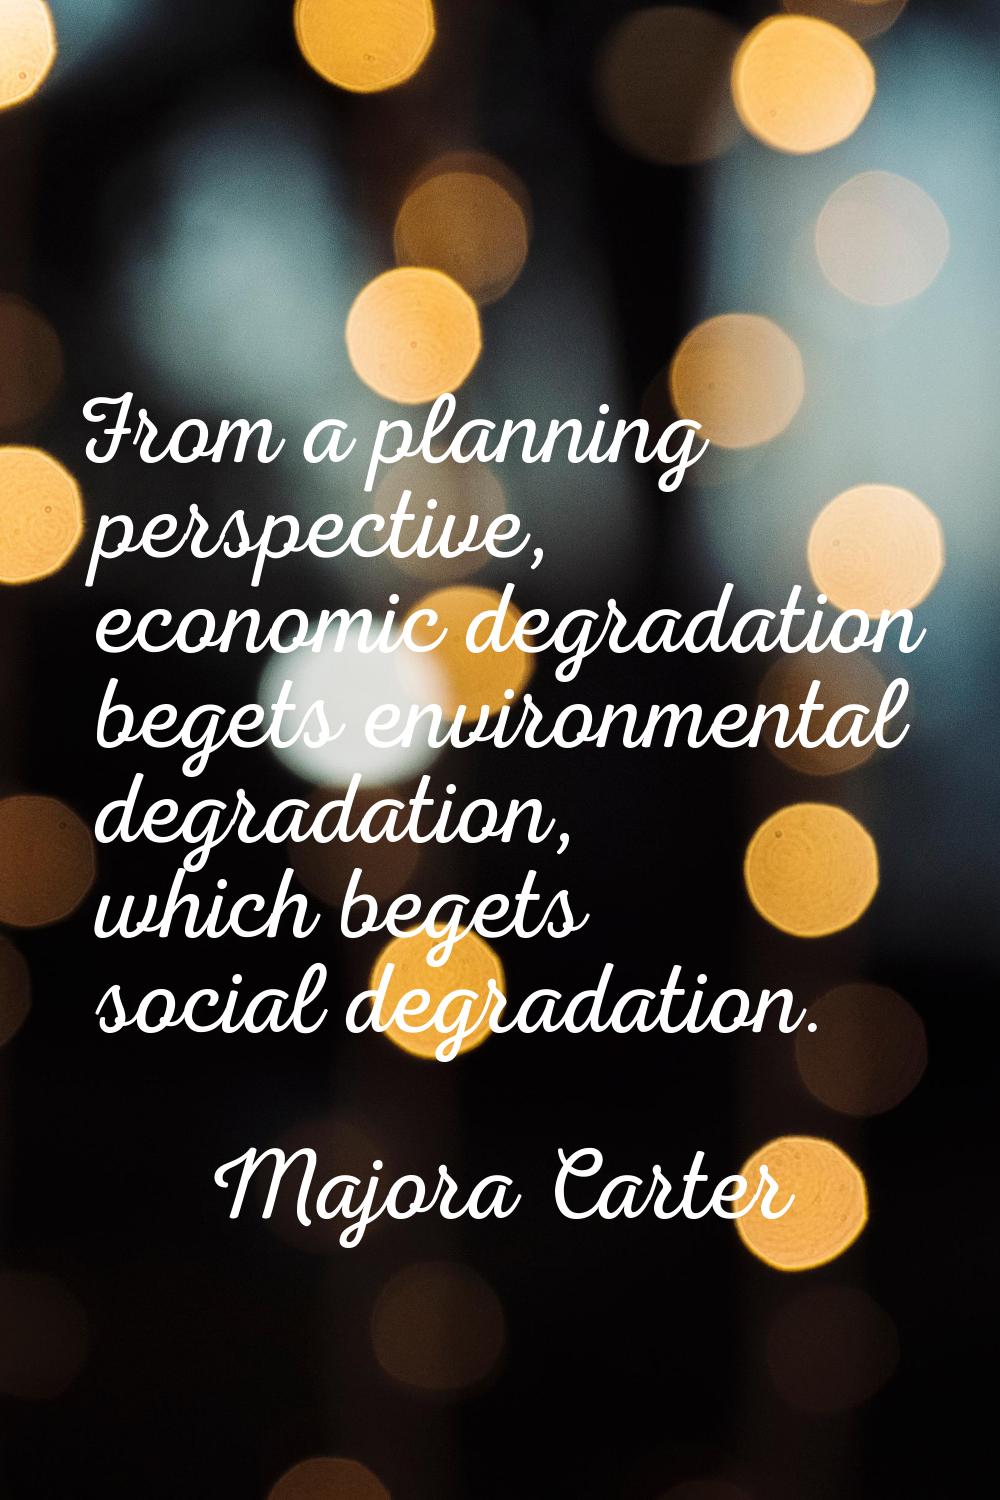 From a planning perspective, economic degradation begets environmental degradation, which begets so